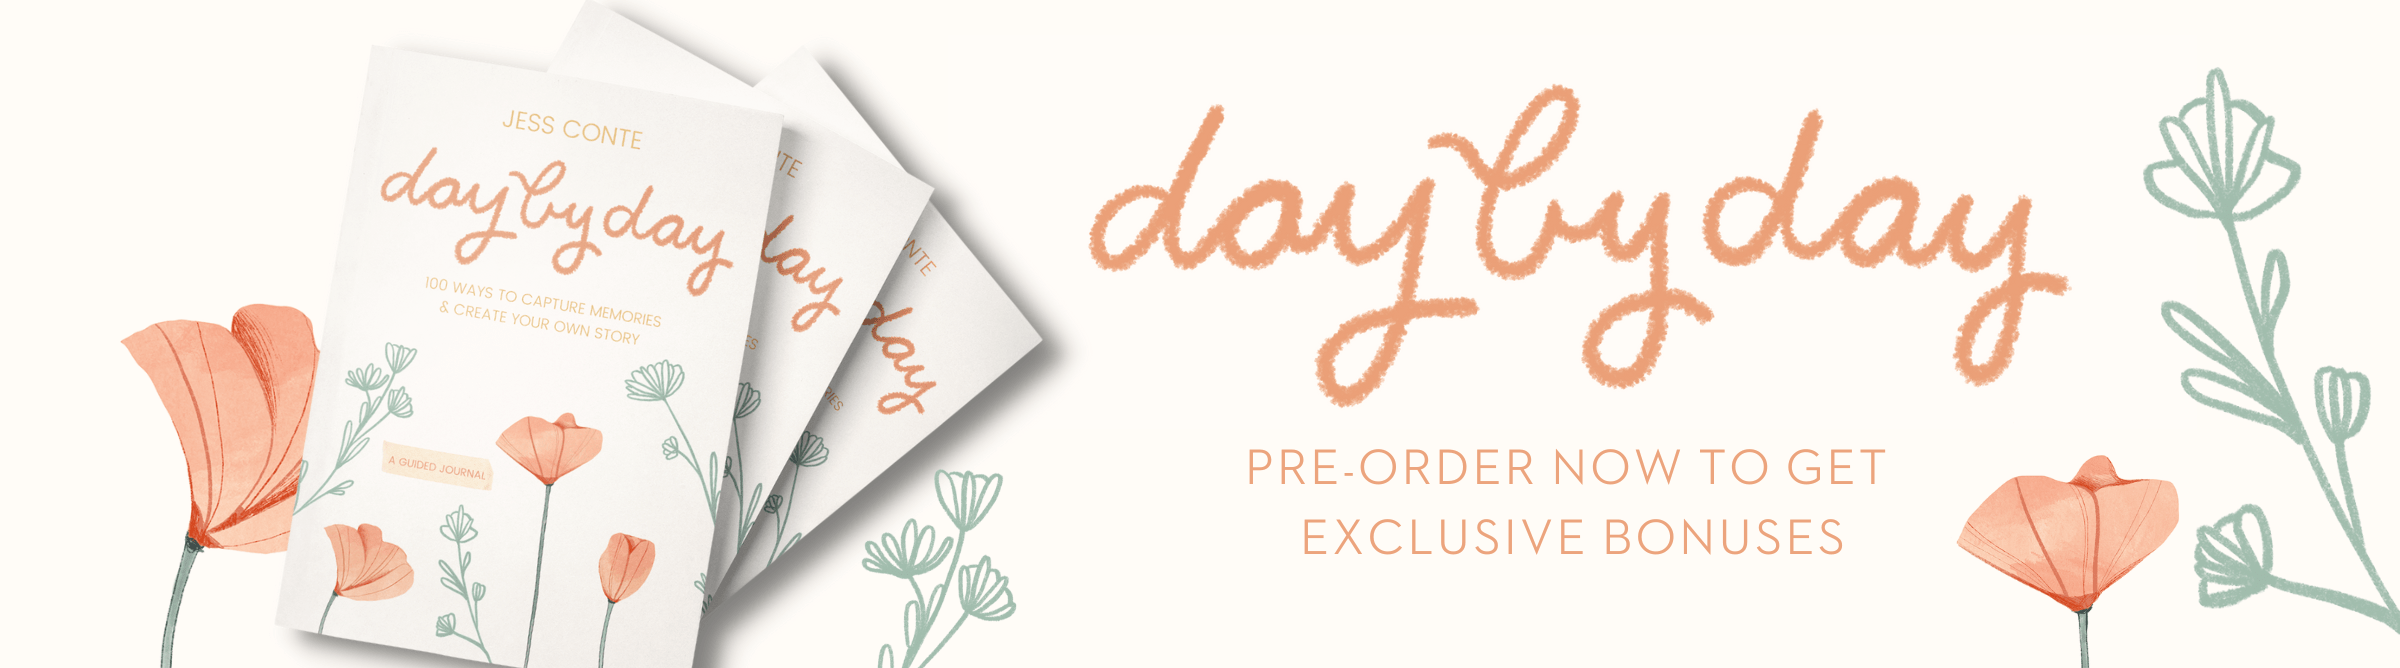 Designed graphic advertising a pre-order offer for Day by Day from Jess Conte